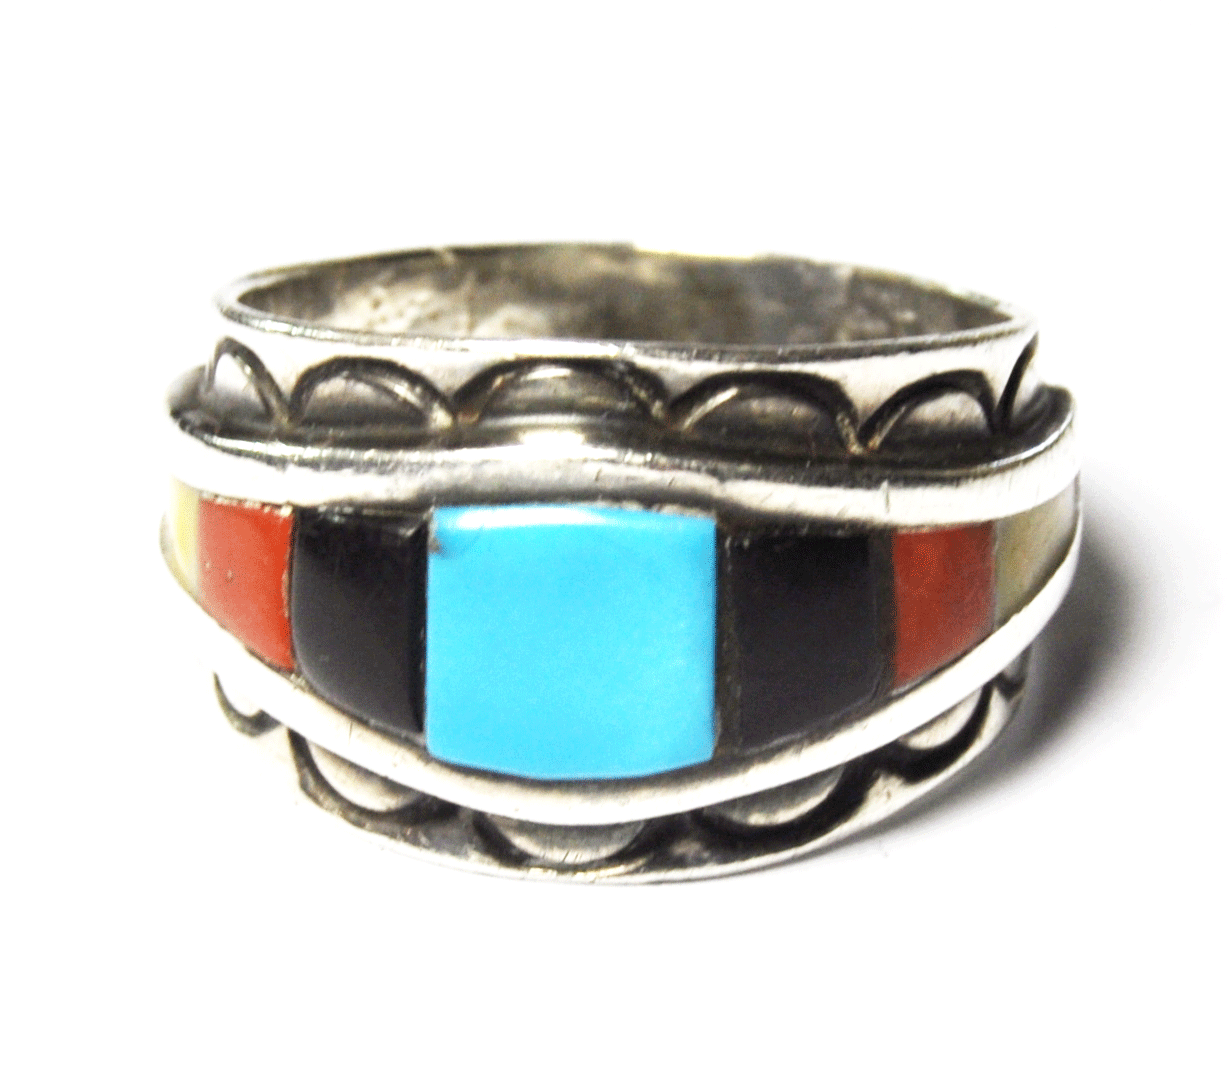 Beautiful Sterling Silver W Dodson IHMSS Stepped Inlay Ring 17mm Size 12.5